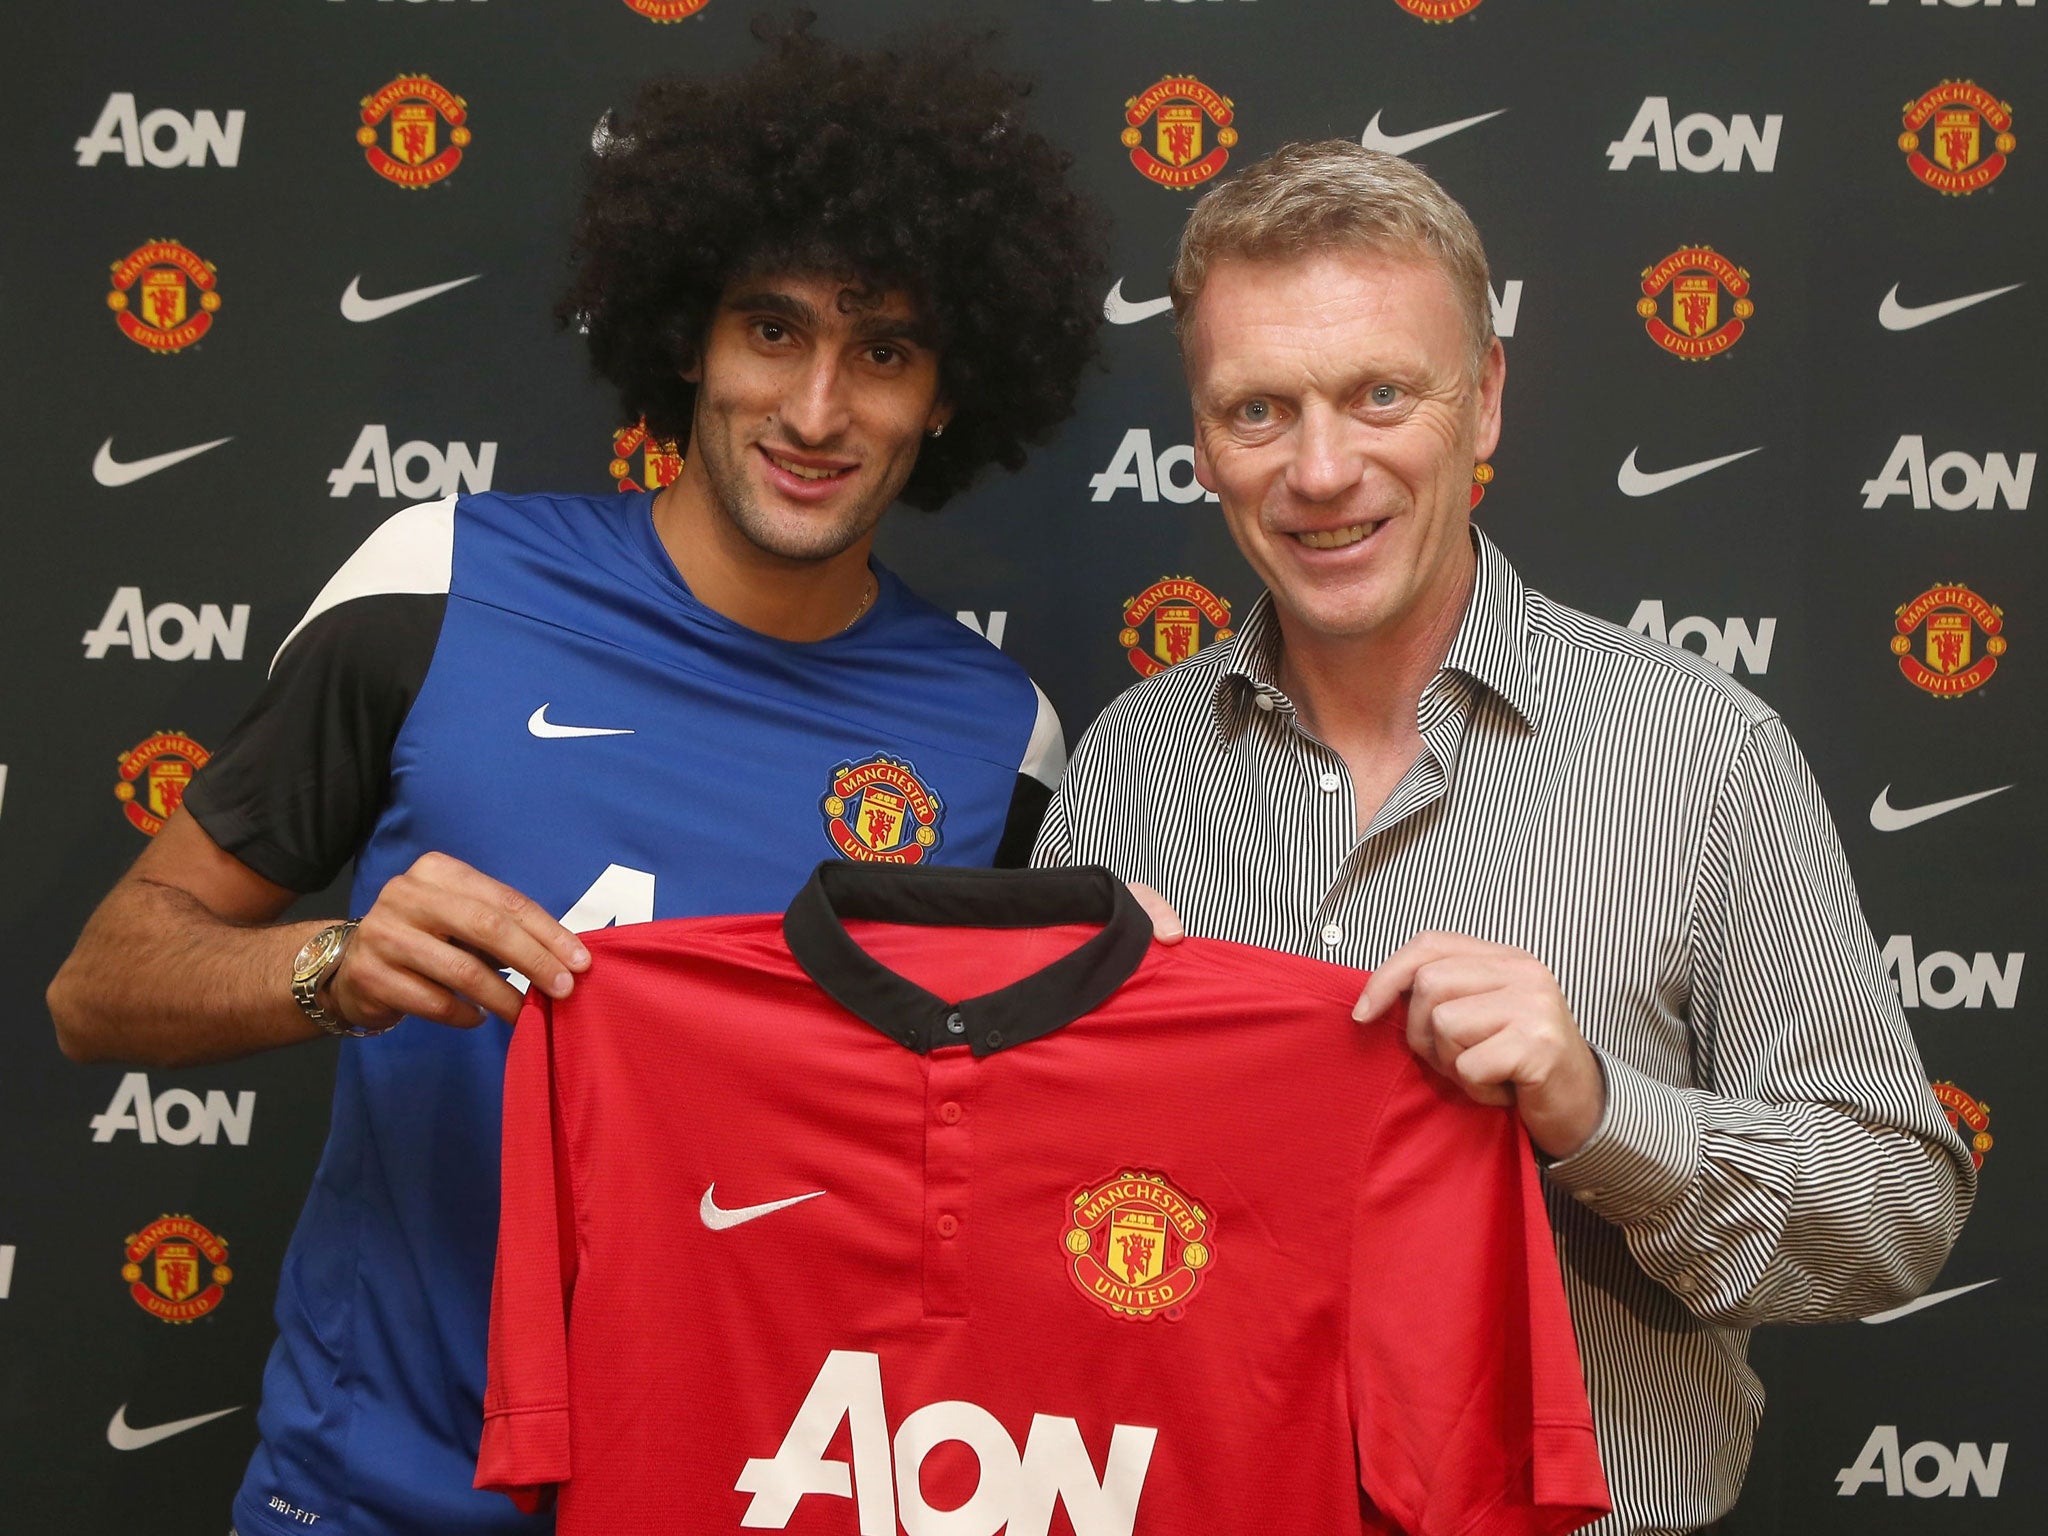 David Moyes signed Marouane Fellaini late on Monday night as well as Saidy Janko from FC Zurich